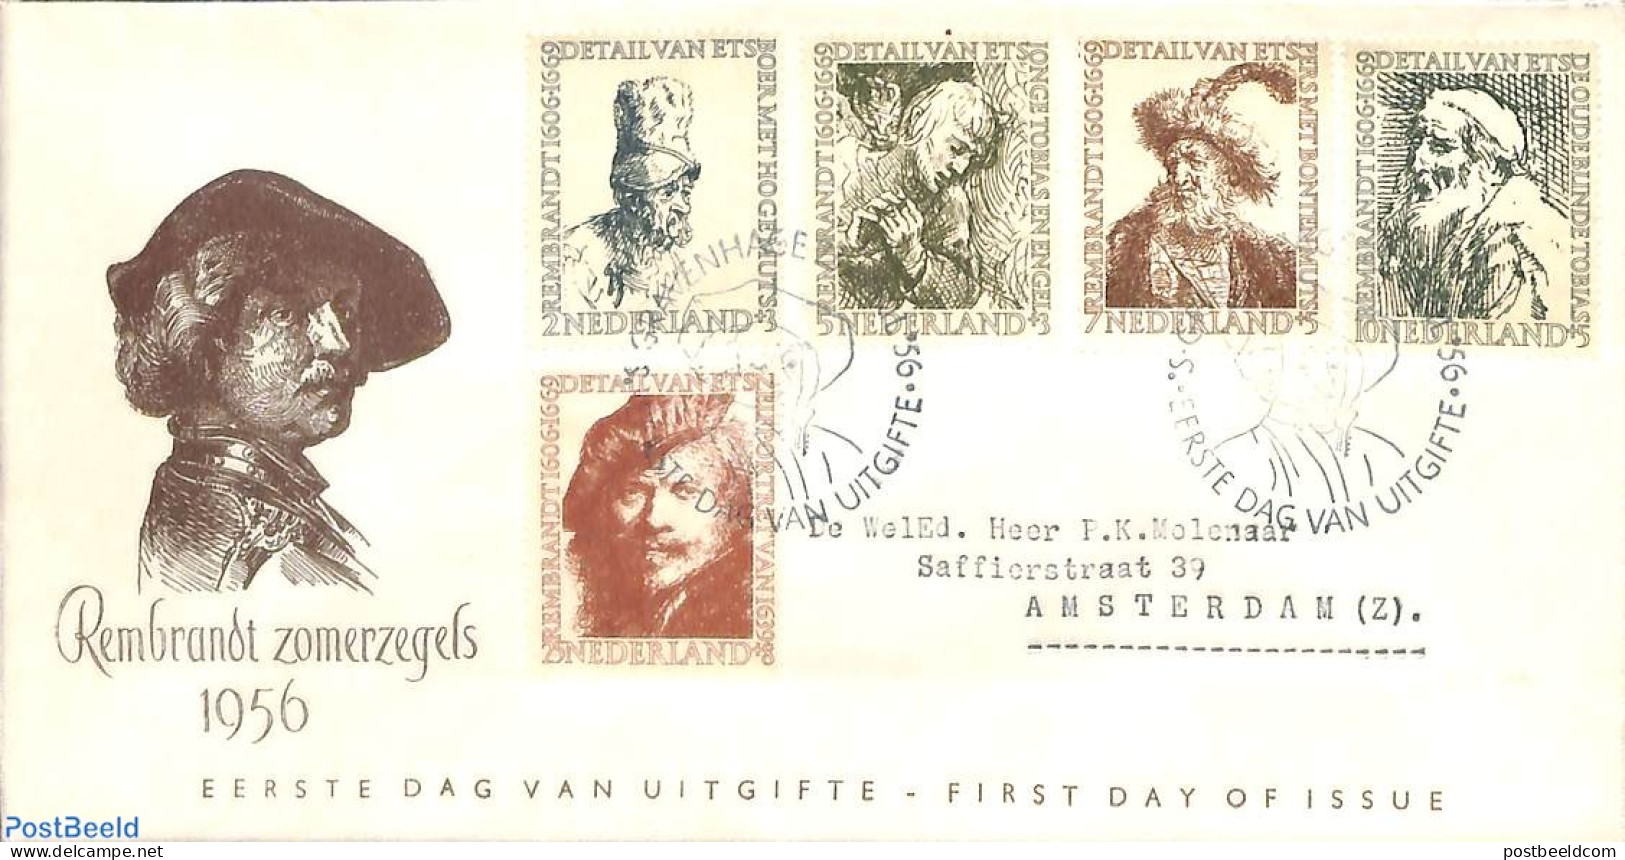 Netherlands 1956 Rembrandt 5v, FDC, Open Flap, Typed Address, First Day Cover, Art - Rembrandt - Covers & Documents